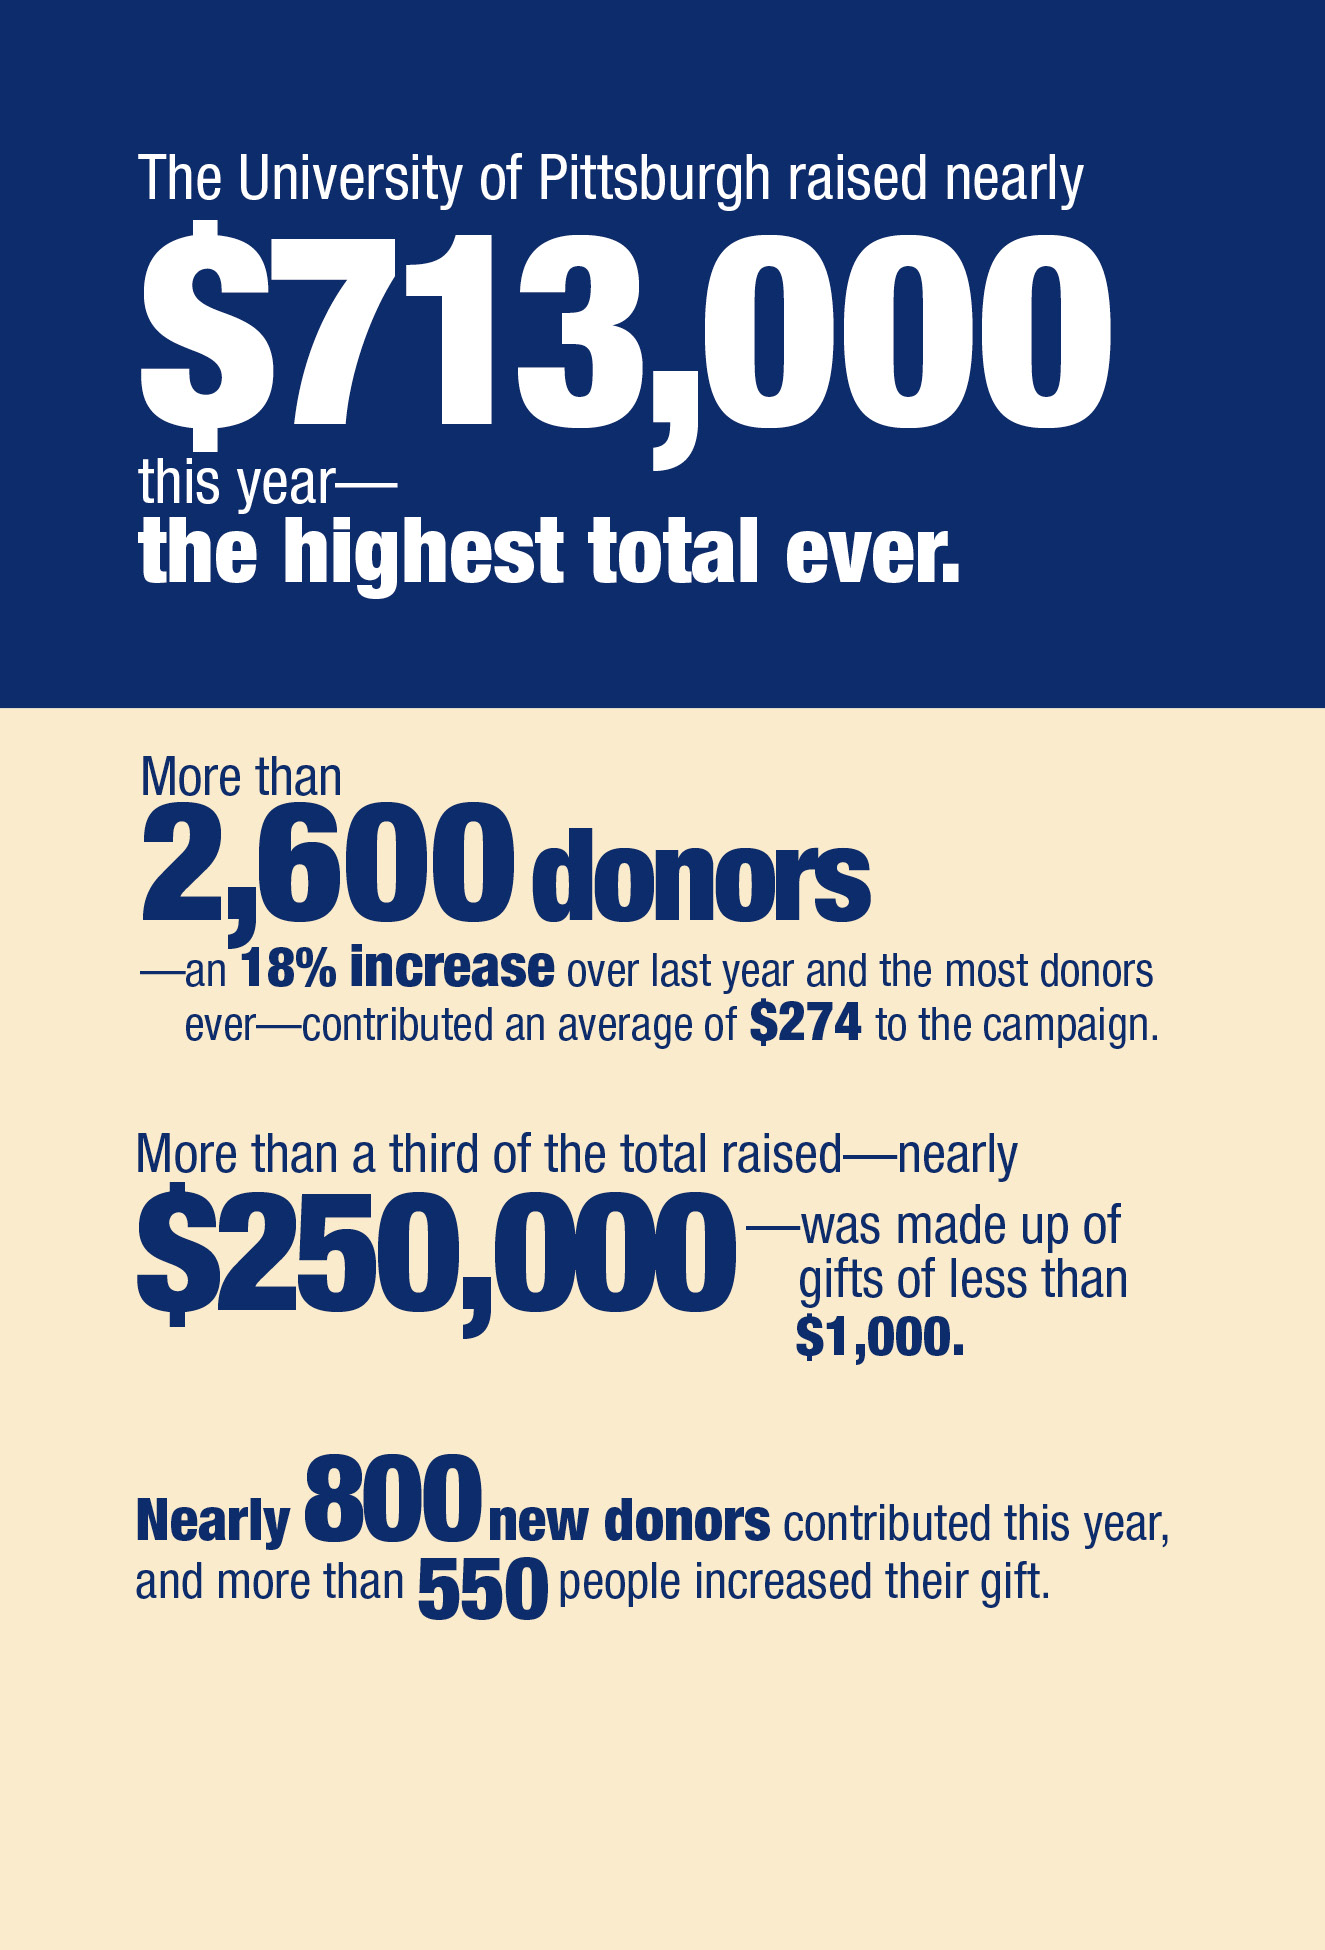 The University of Pittsburgh raised nearly $713,000 this year — the highest total ever. More than 2,600 donors — an 18% increase over last ear and the most donors ever — contributed an average of $274 to the campaign. More than a third of the total raised — $250,000 — was made up of gifts less than $1,000. Nearly 800 new donors contributed this year, and more than 550 people increased their gift.